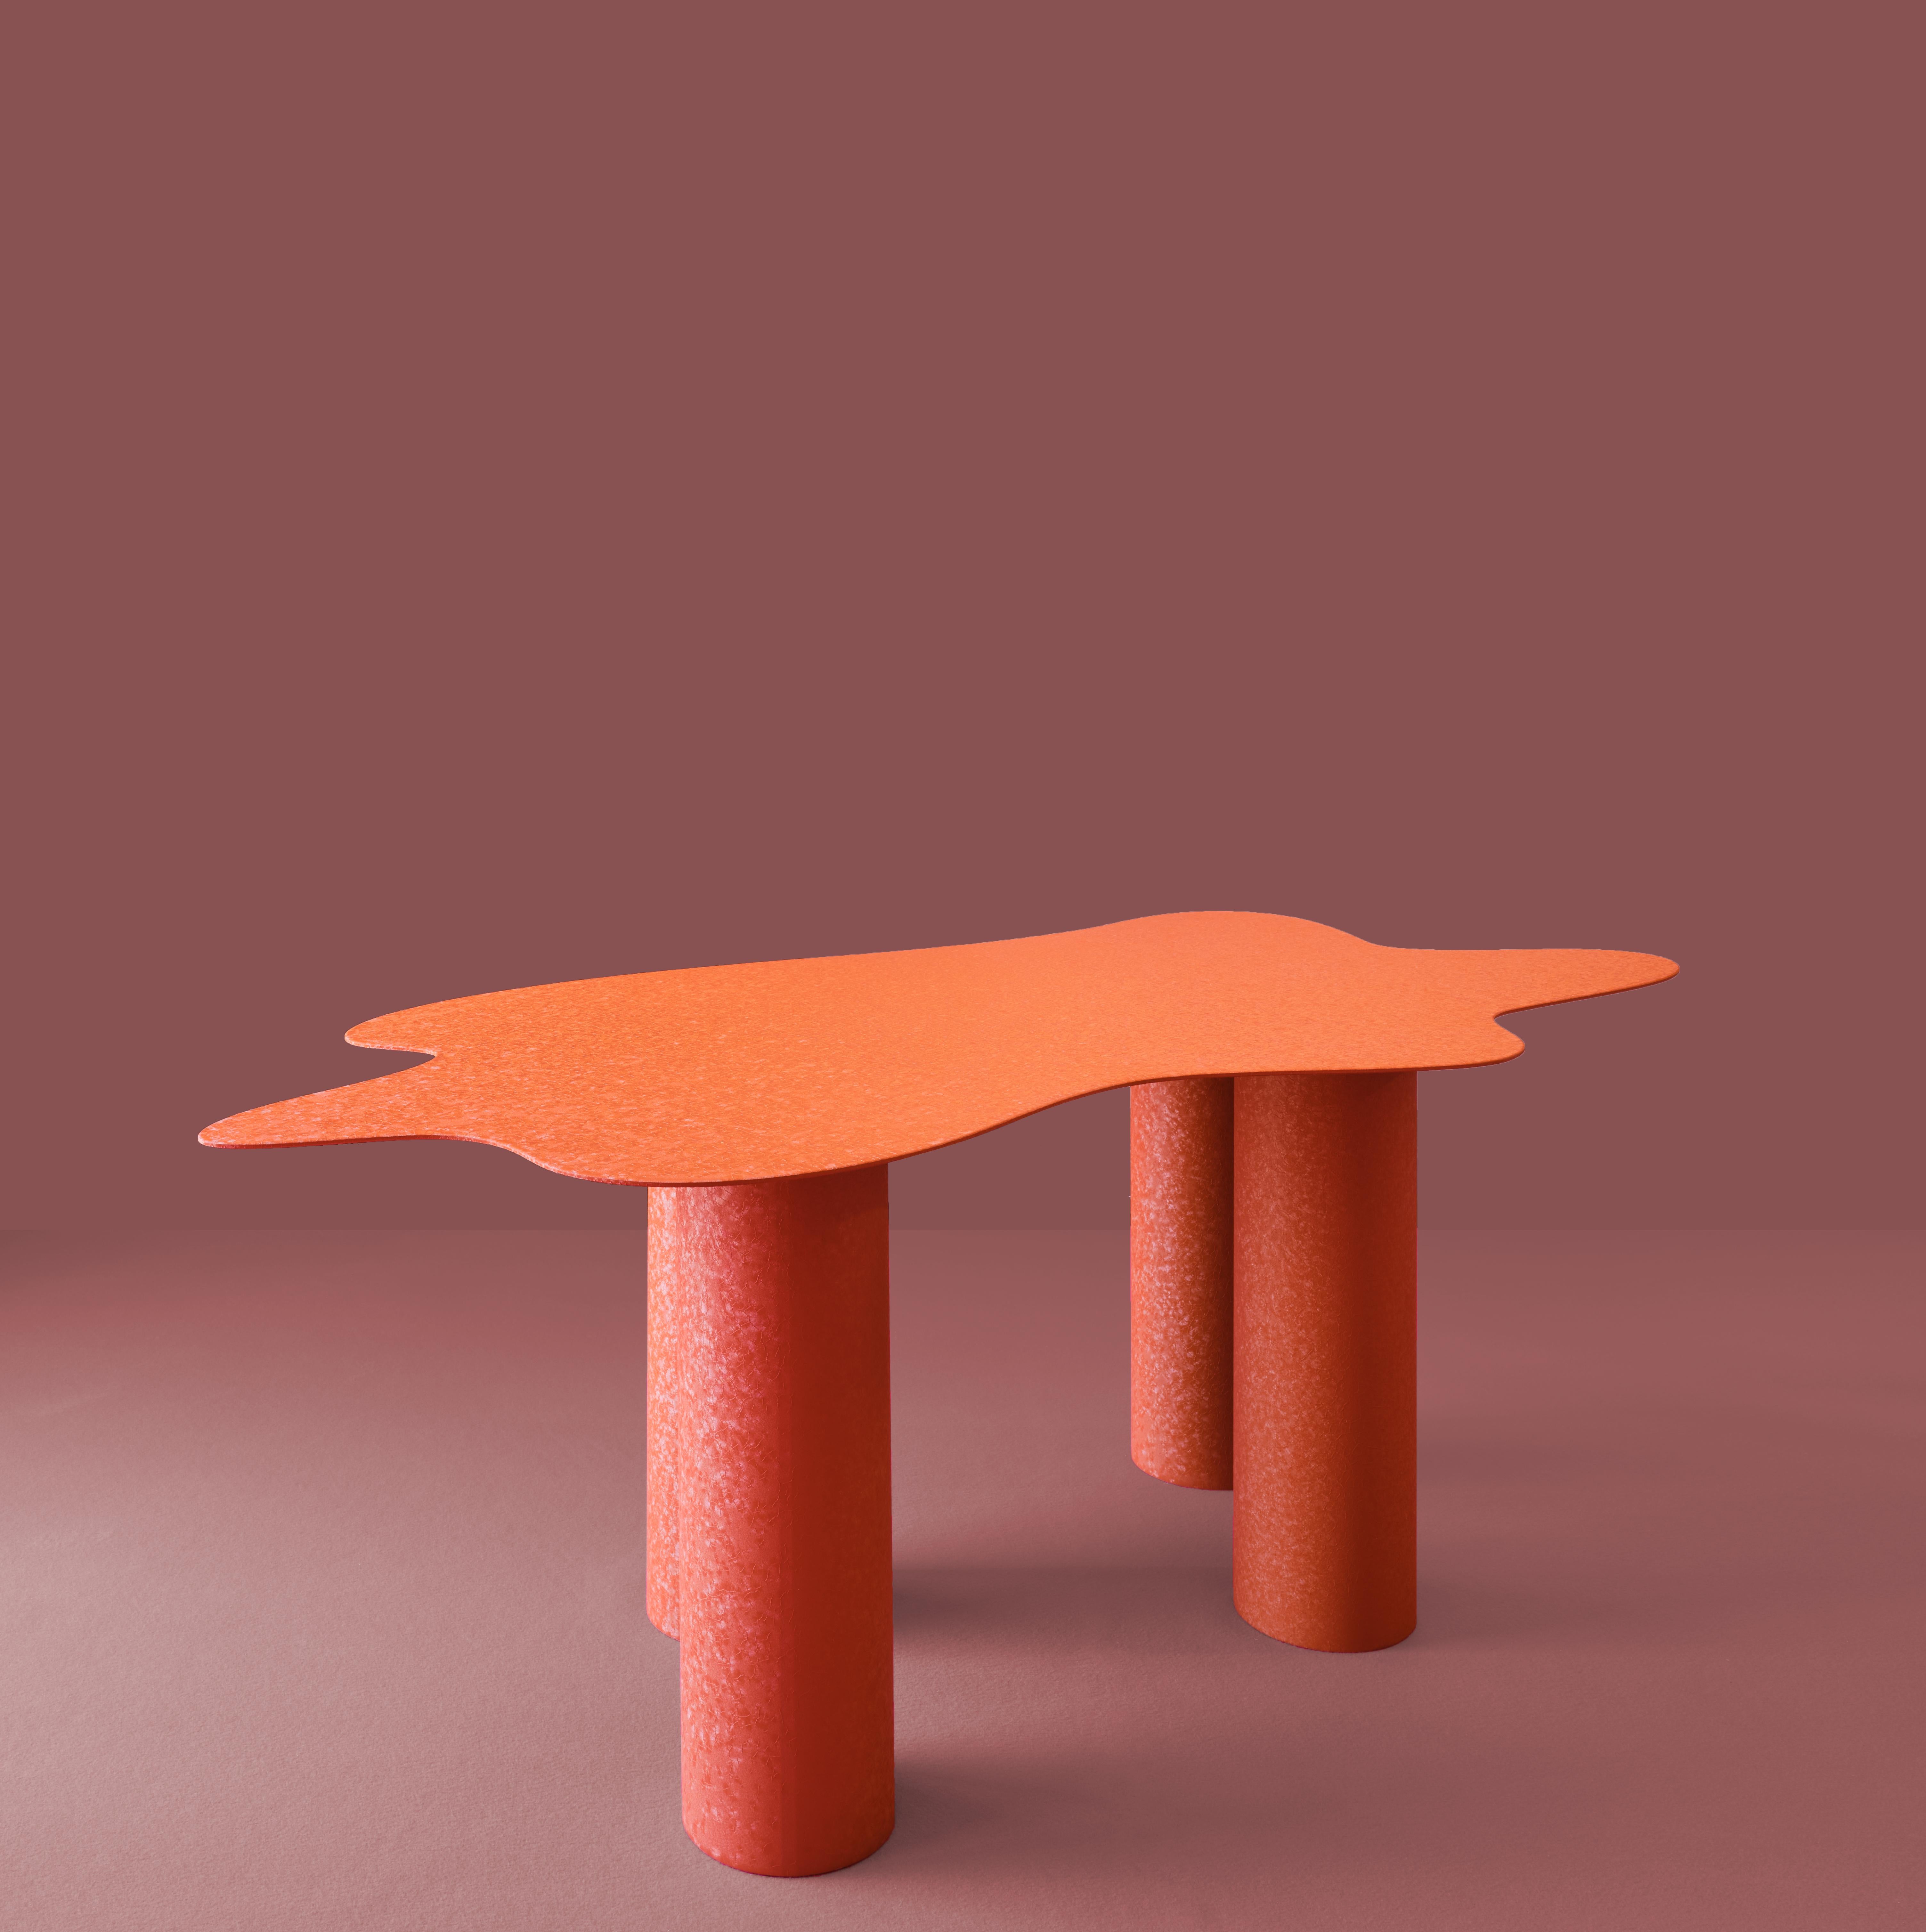 Onda table works on the juxtaposition of volumes and finishing.

A Wavy organic extra-thin top on architectural chunky cylindric legs. Like a paper sheet the top sit gently on the oversize legs to express powdercoated industrial finishes,